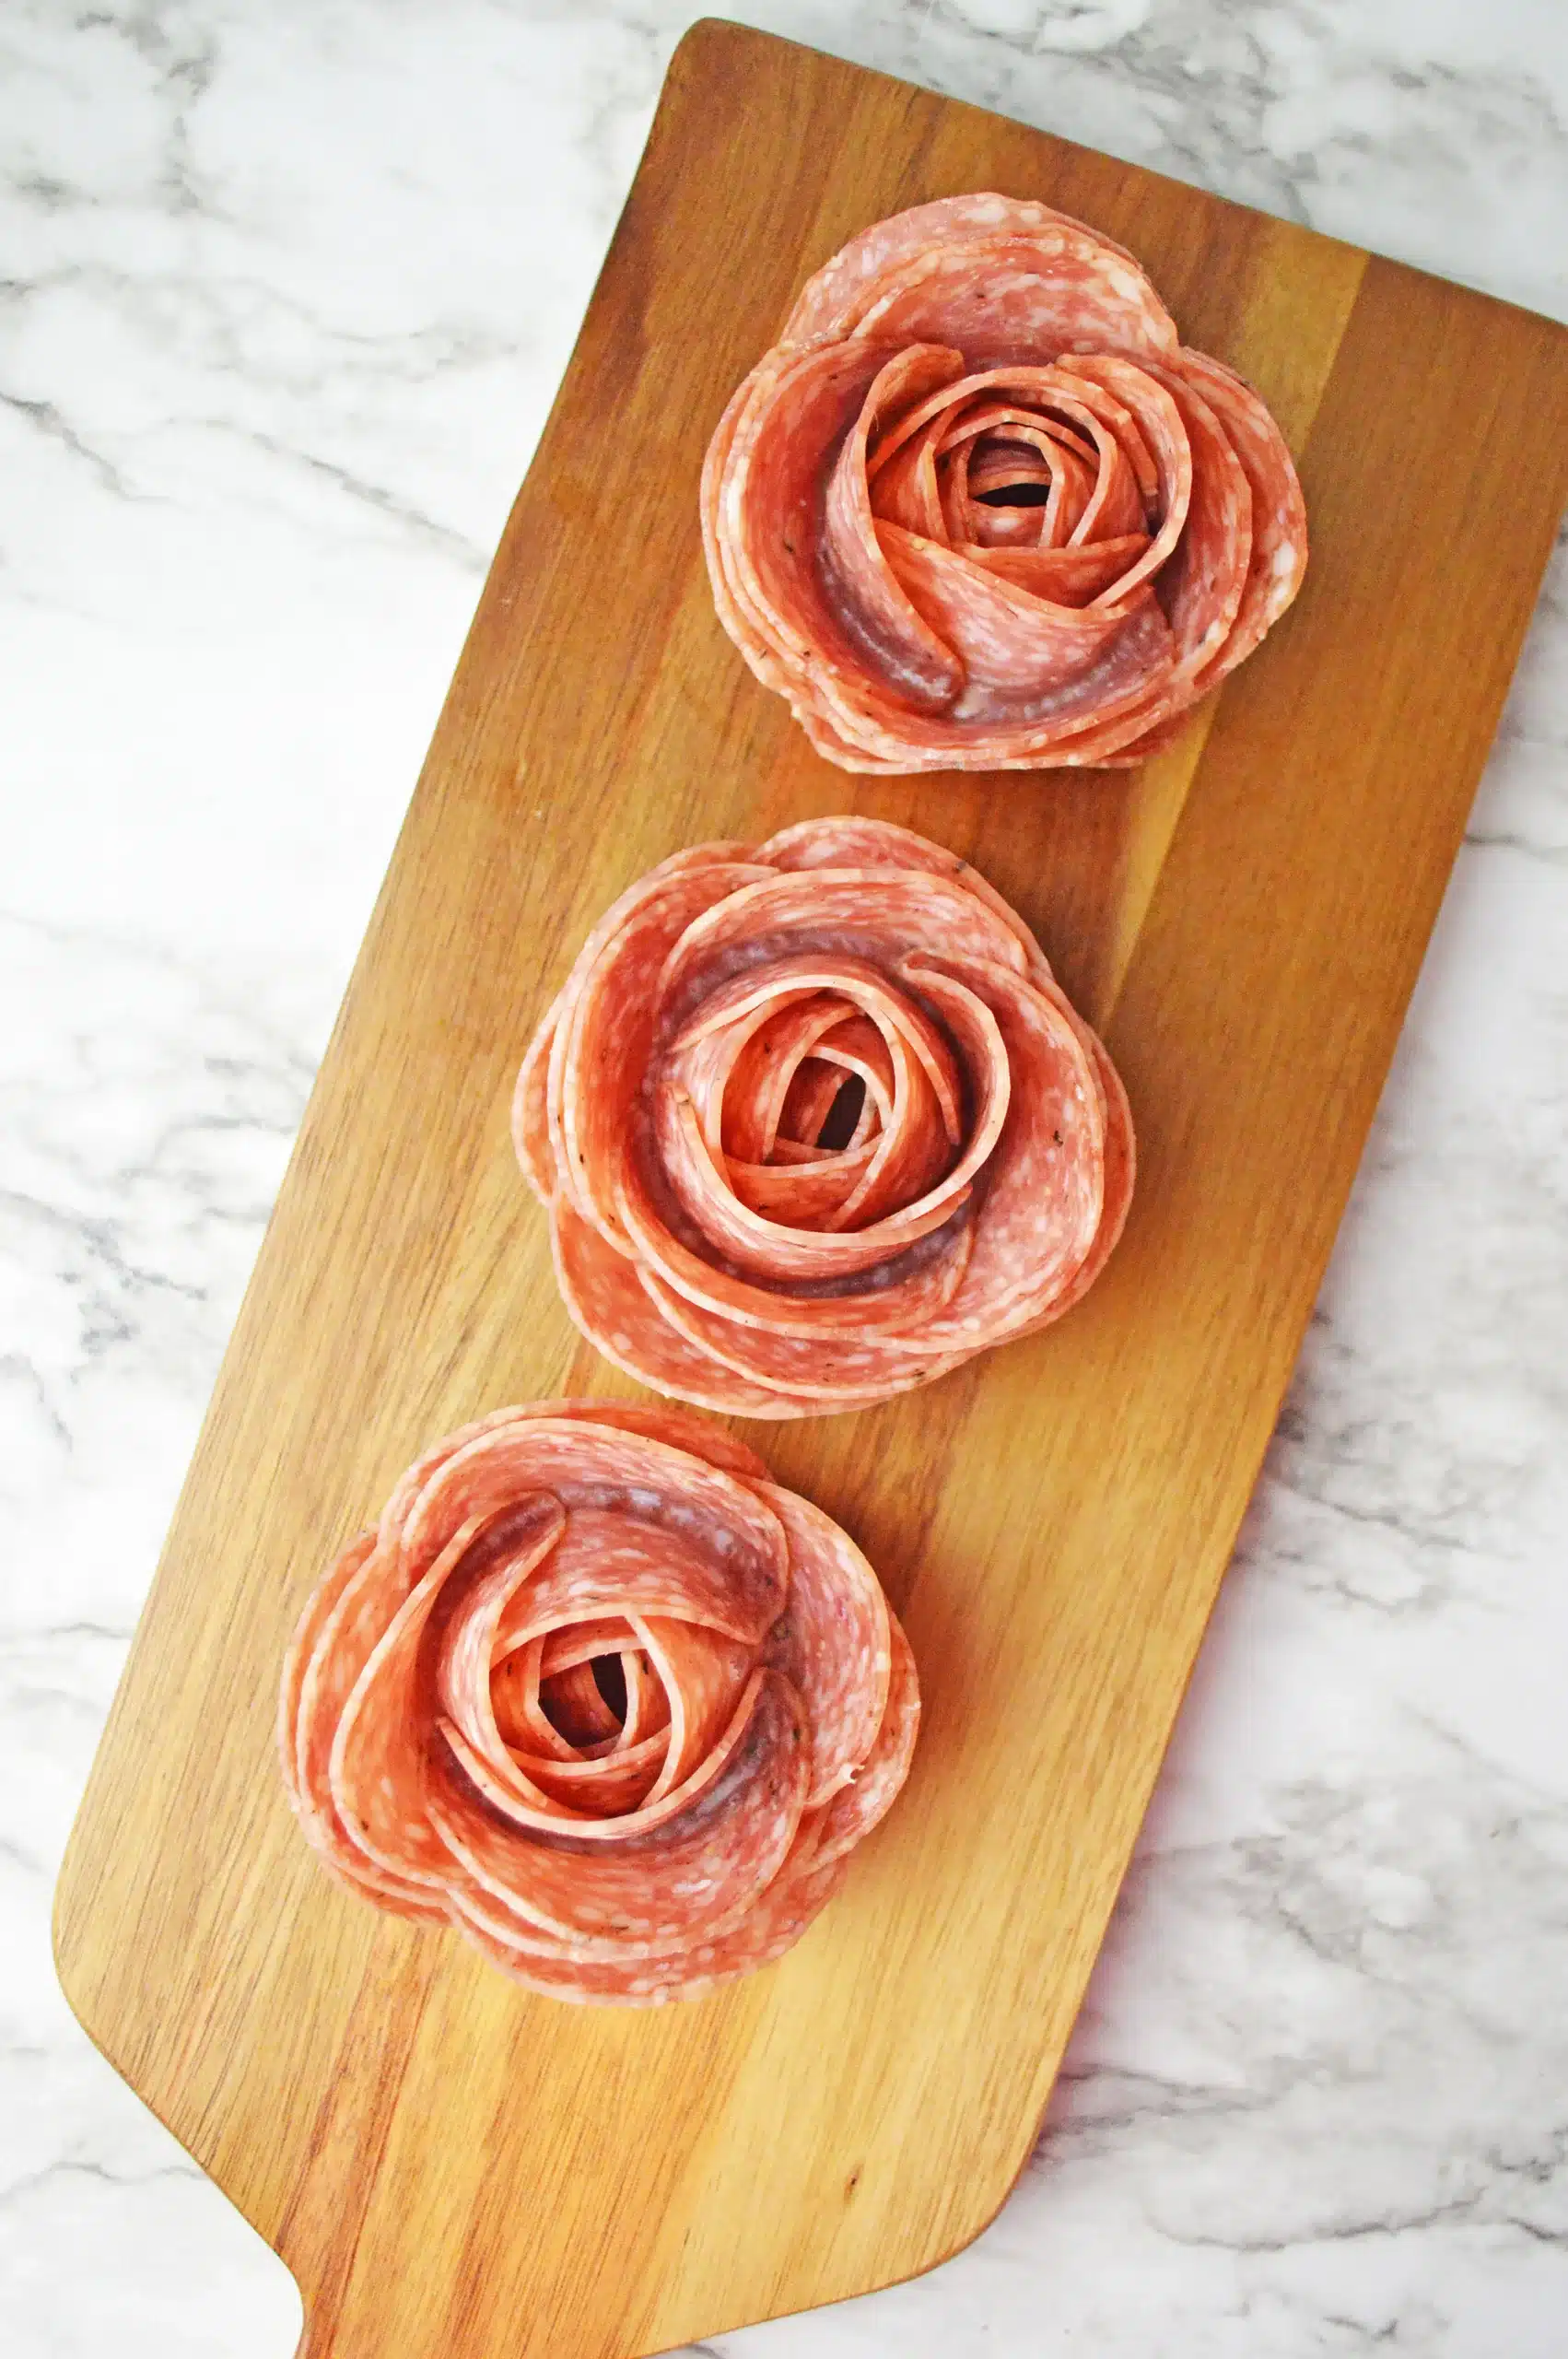 How to Make Charcuterie Roses